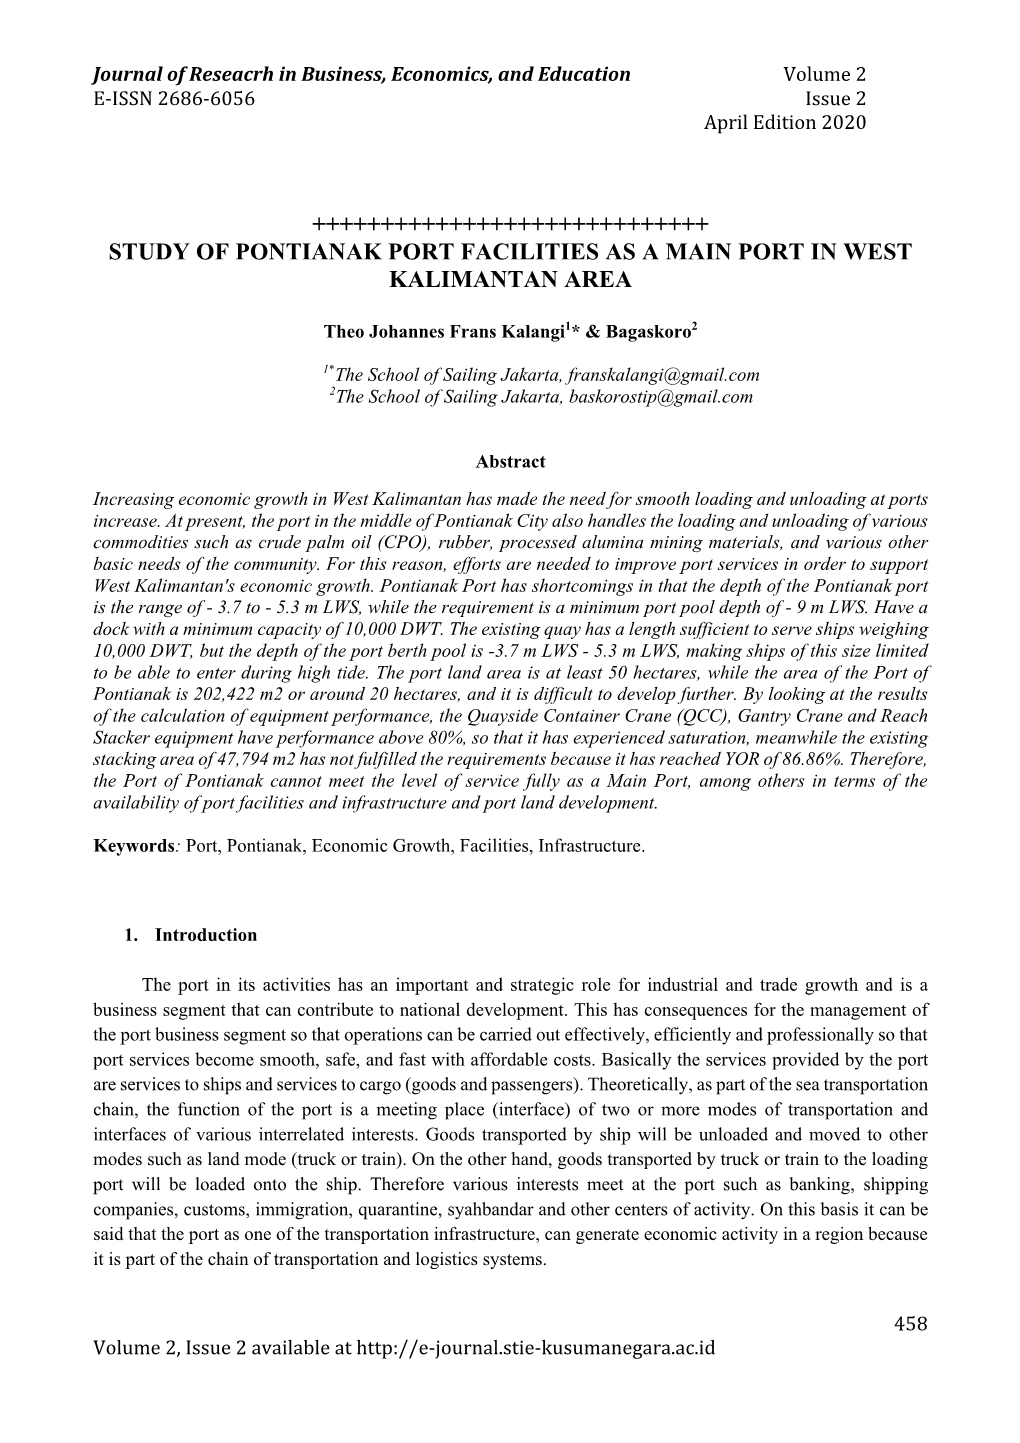 +++++++++++++++++++++++++++++ Study of Pontianak Port Facilities As a Main Port in West Kalimantan Area